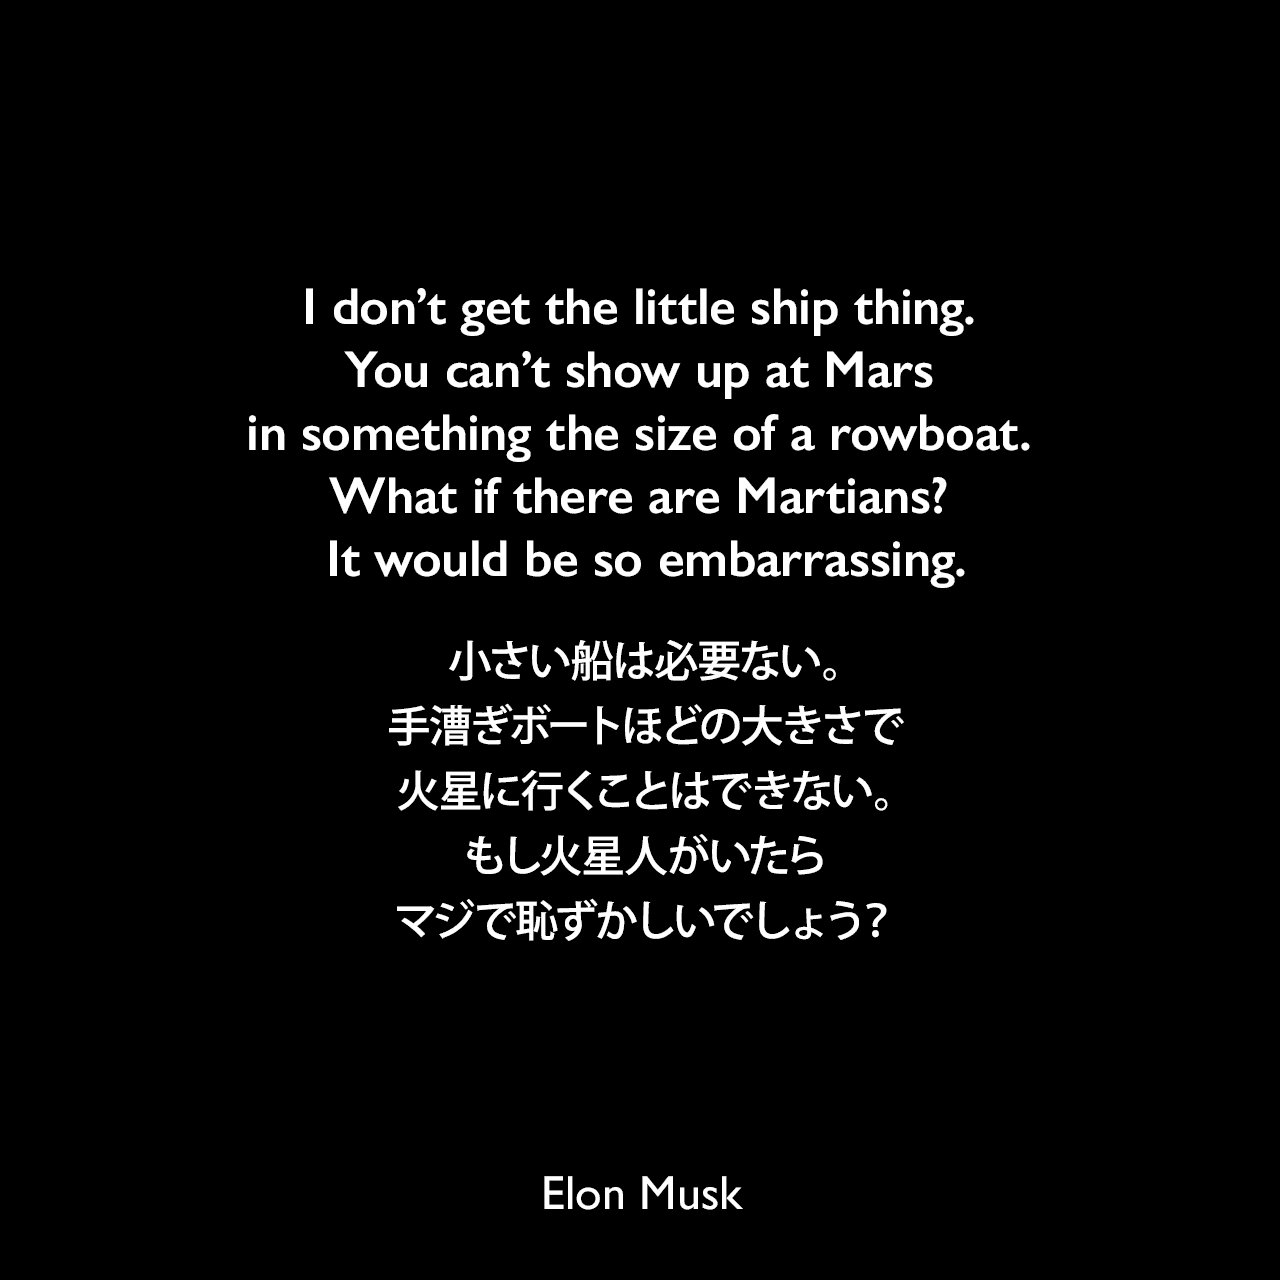 I don’t get the little ship thing. You can’t show up at Mars in something the size of a rowboat. What if there are Martians? It would be so embarrassing.小さい船は必要ない。手漕ぎボートほどの大きさで火星に行くことはできない。もし火星人がいたらマジで恥ずかしいでしょう？- 2018年2月のイーロン・マスクのツイートよりElon Musk